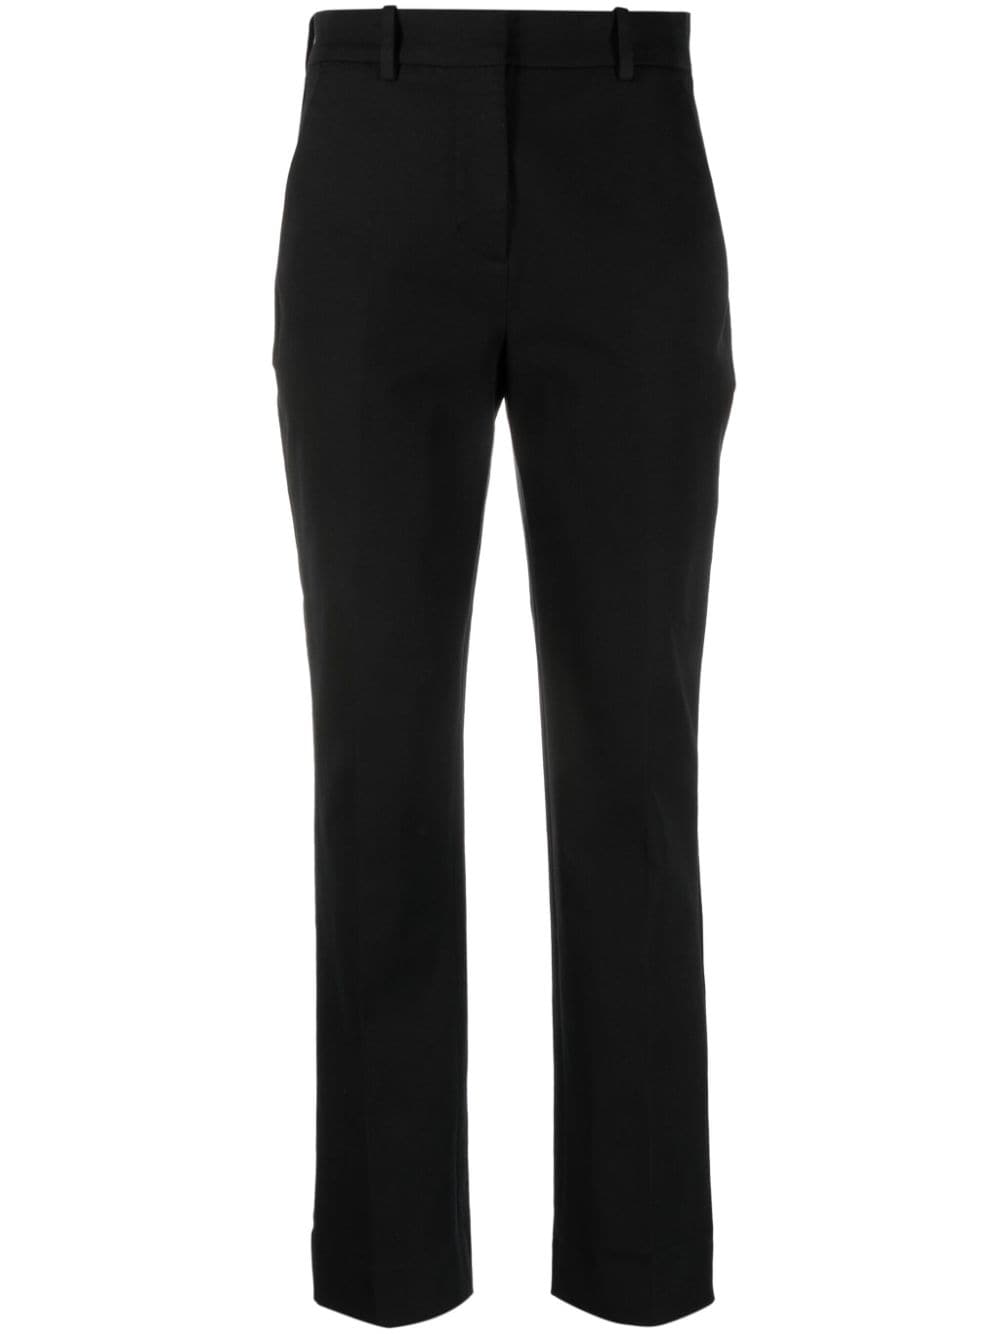 Image 1 of Calvin Klein cropped gabardine trousers